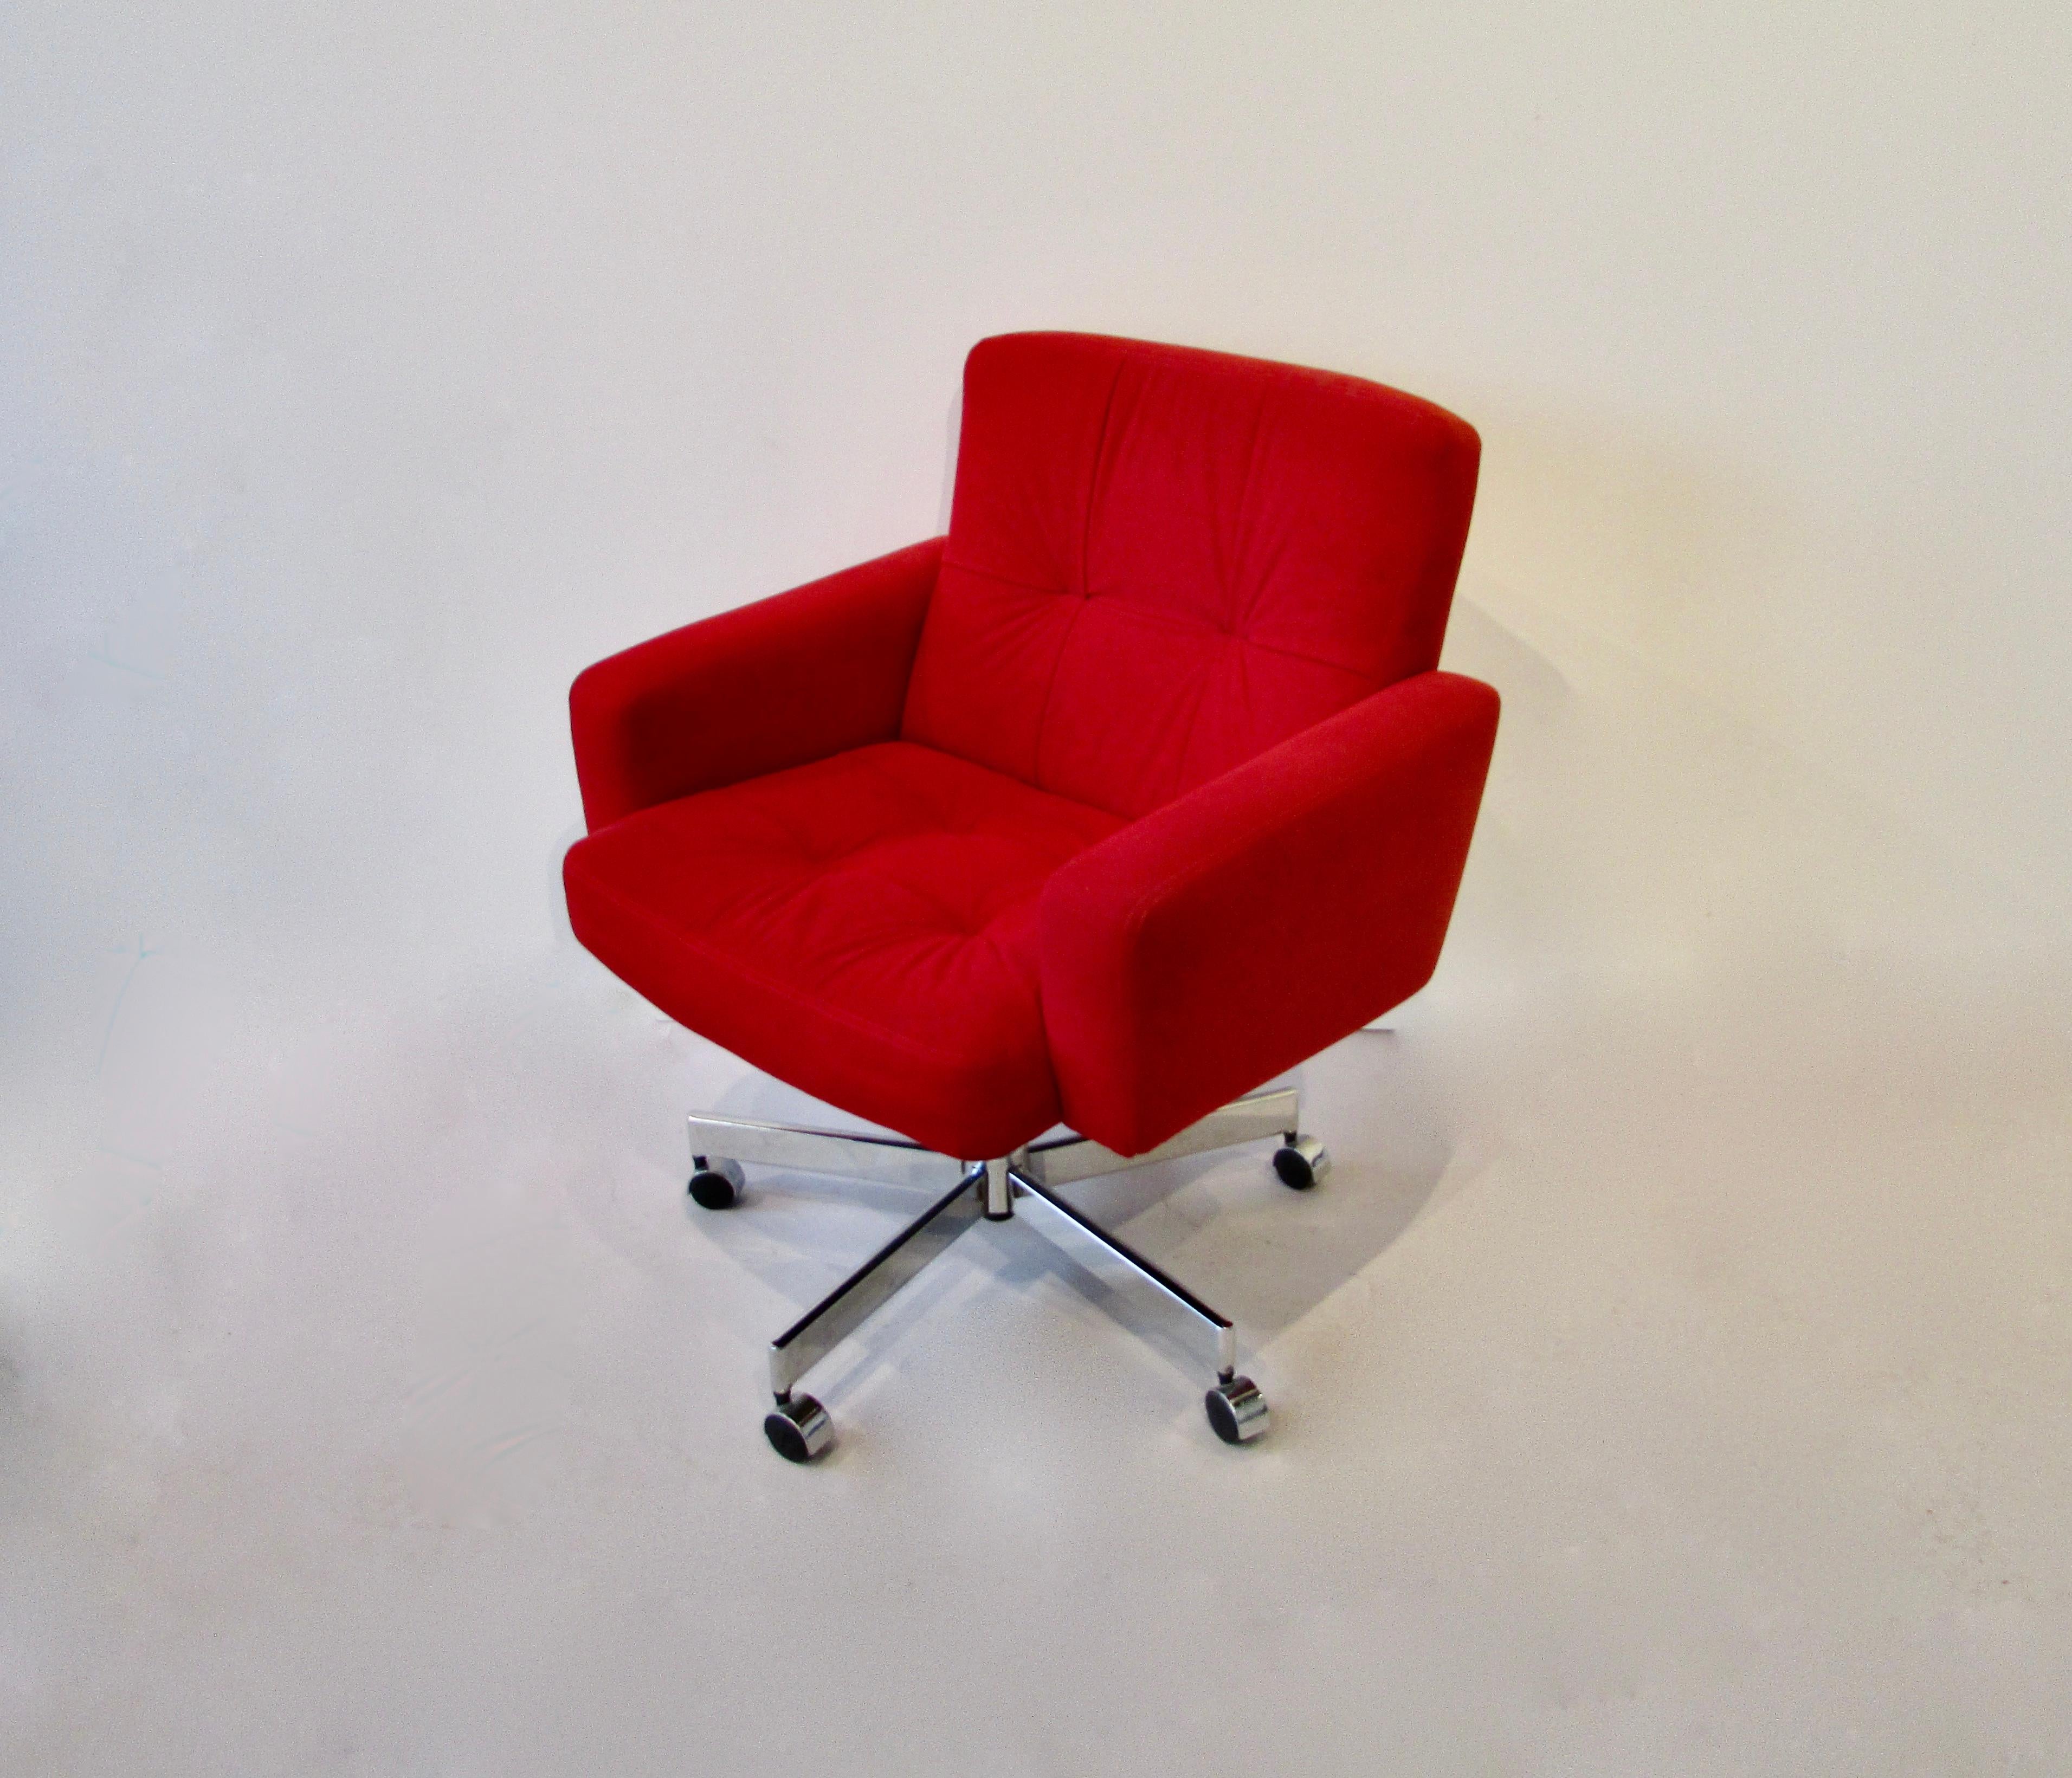 I believe this is red ultra suede fabric on rolling chrome base. Very nice condition. Chair swivels and tilts. Manufactured by Fortress furniture of California. There were four available. Two remain .